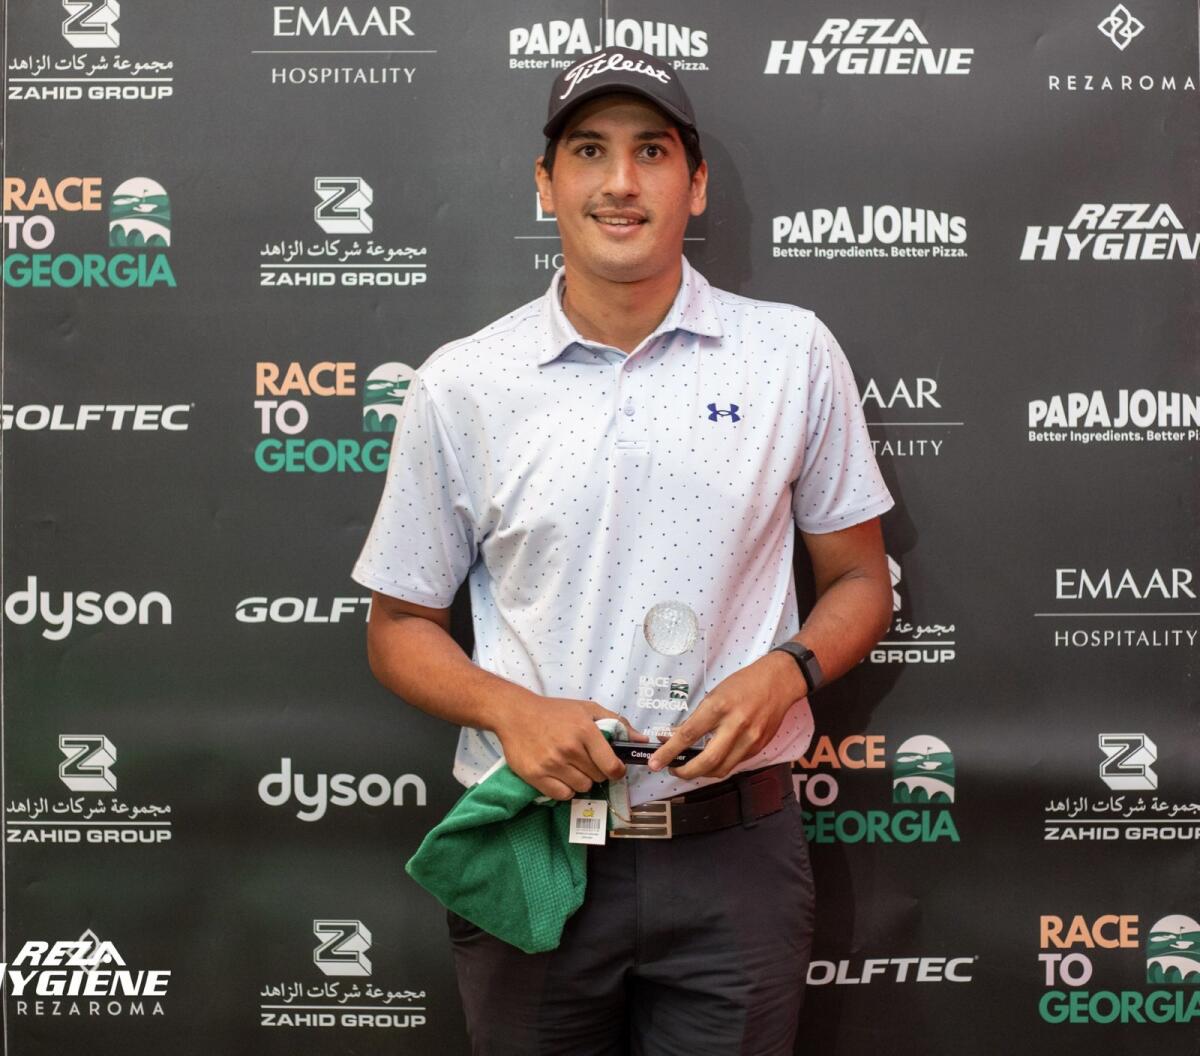 Yaseen Le Falher winner of Division A of the Bahrain Race to Georgia qualifying round at the Royal Golf Club. - Supplied photo